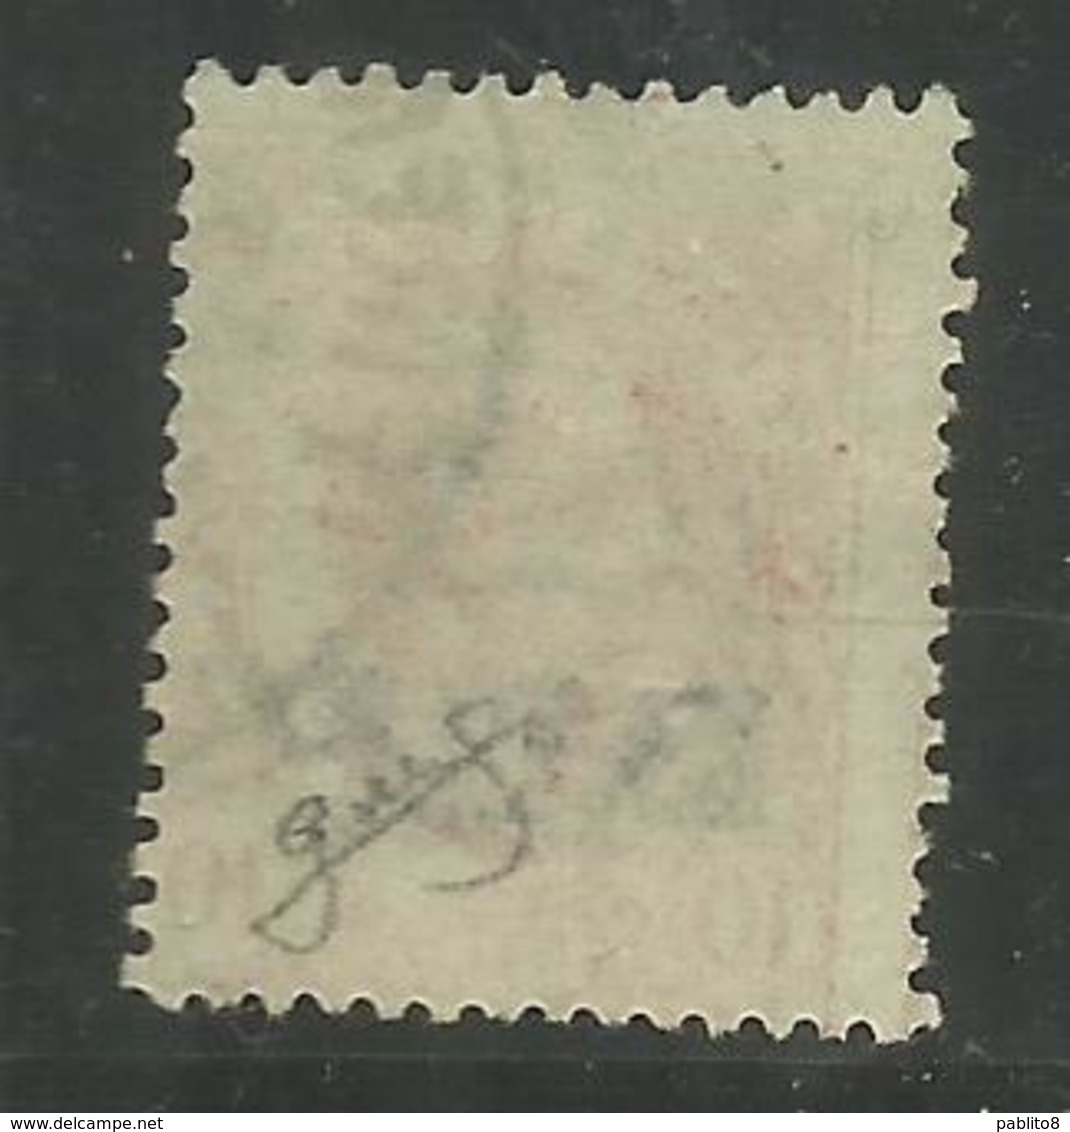 ITALY KINGDOM ITALIA REGNO BLP 1922 - 1923 CENT.10c USATO USED OBLITERE' FIRMATO SIGNED - Stamps For Advertising Covers (BLP)